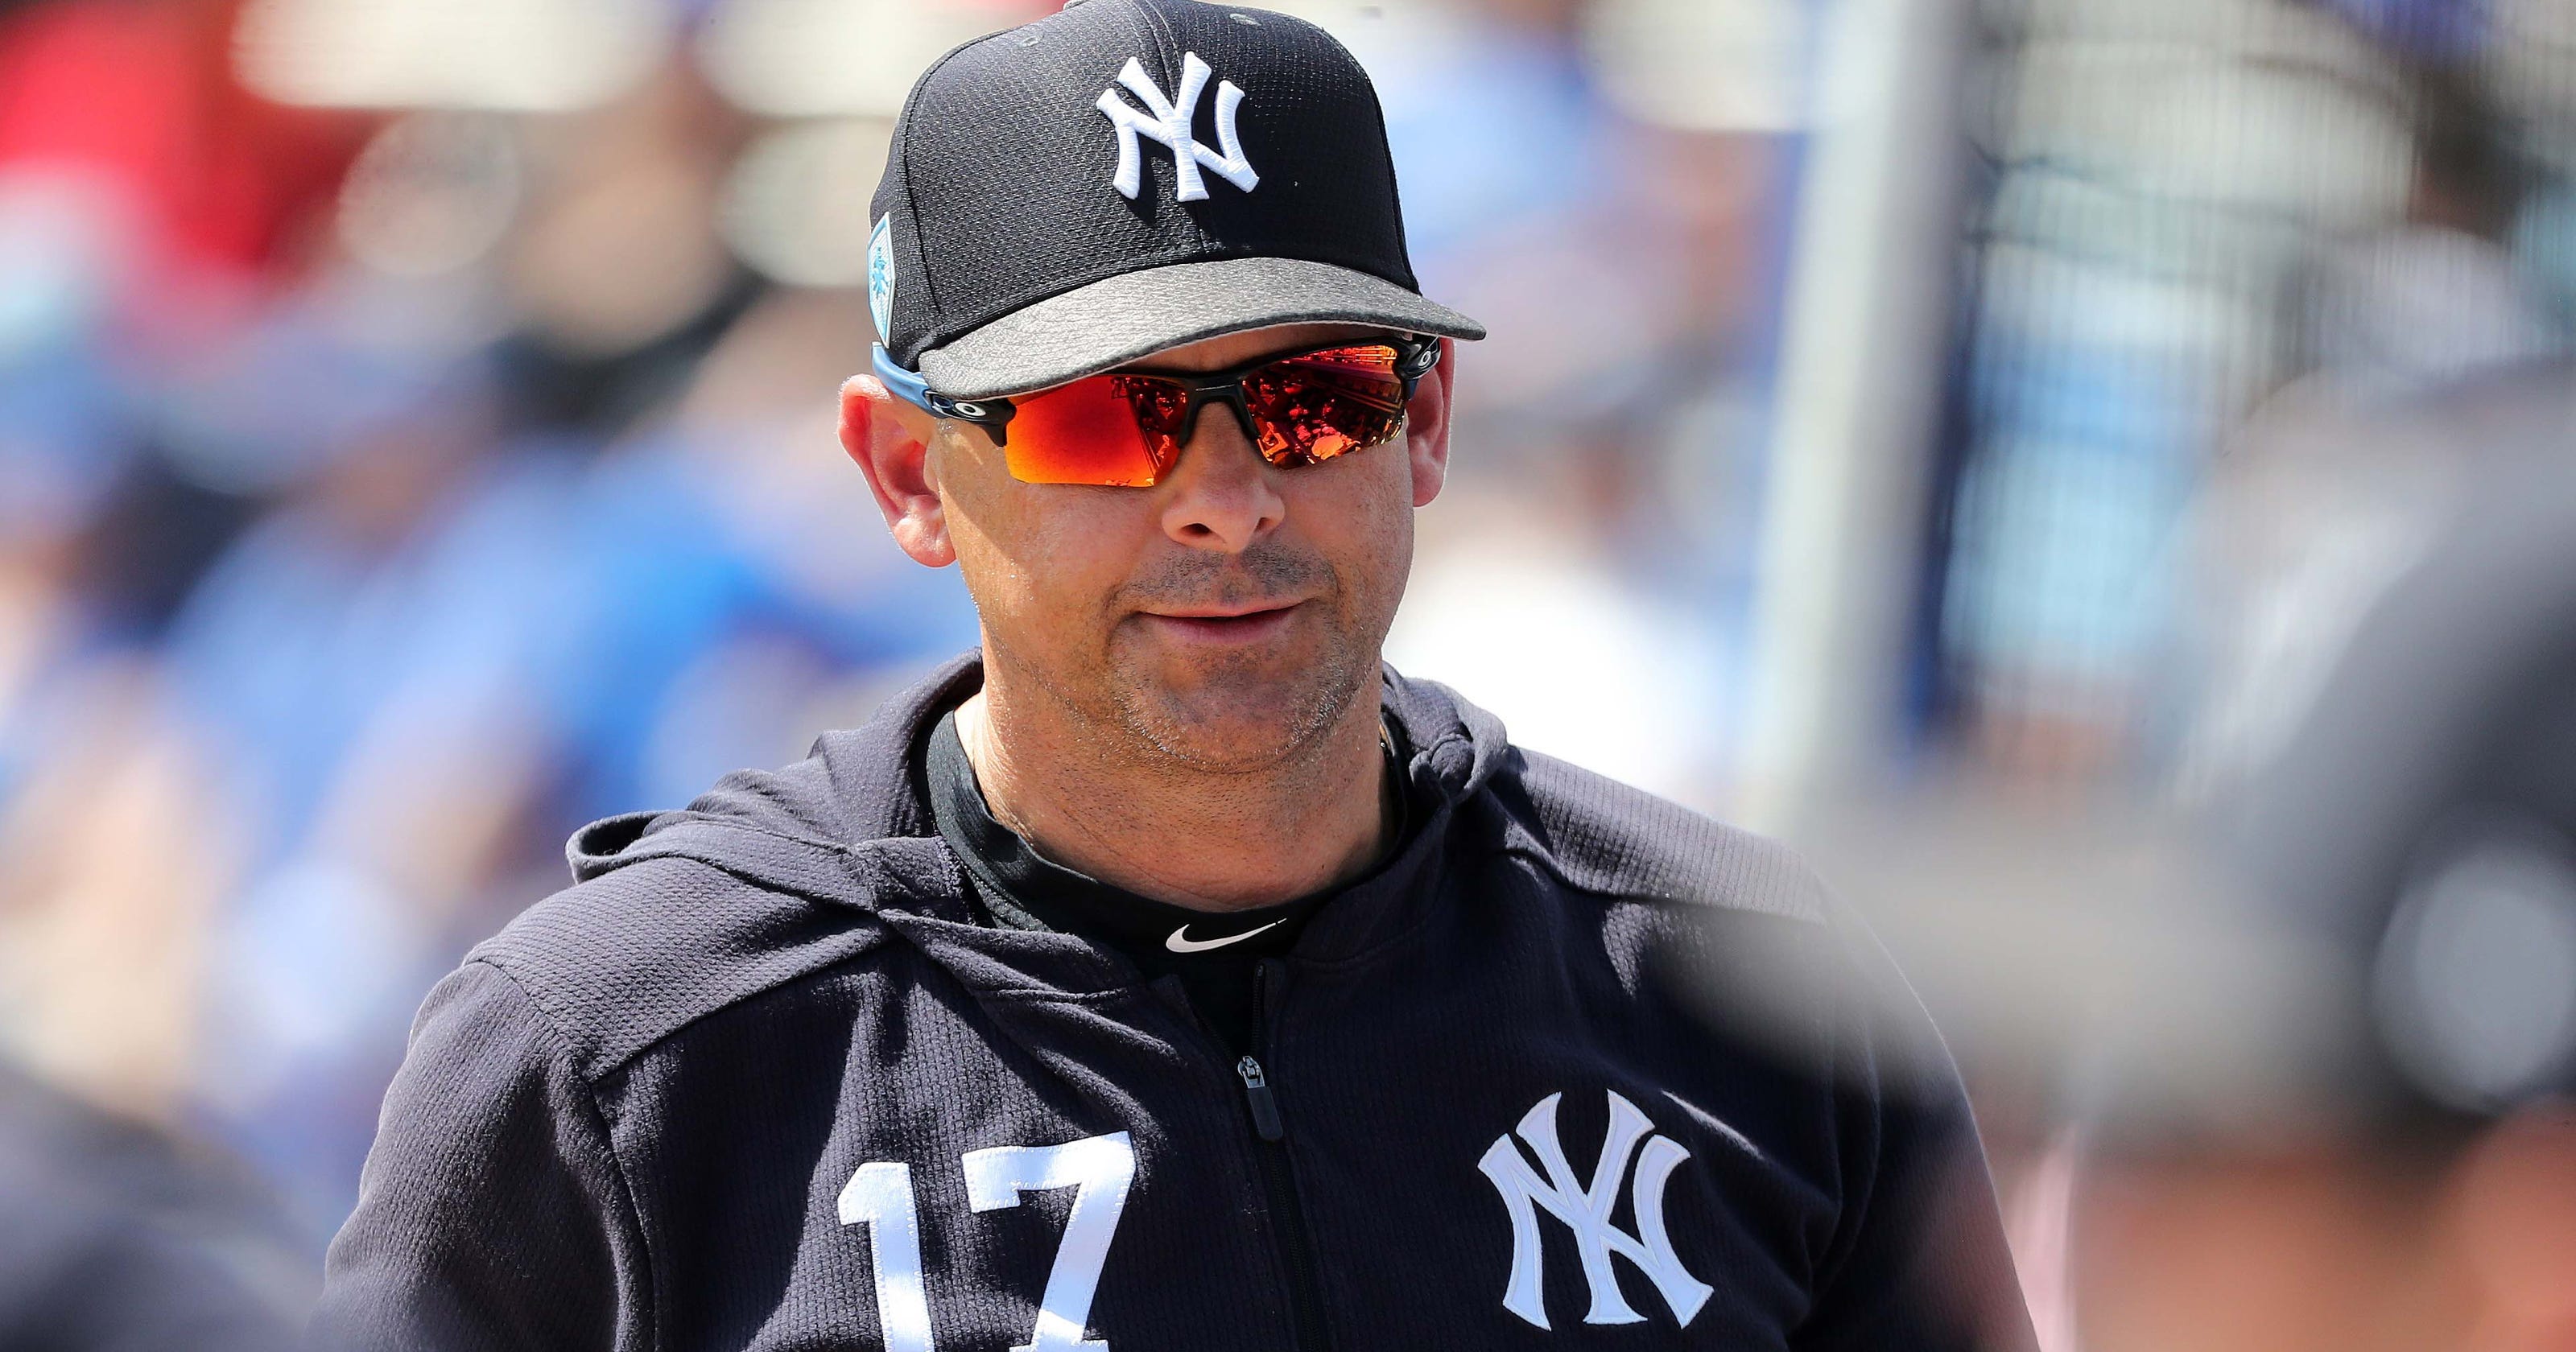 Yankees manager Aaron Boone OK with new pitching rules for 2020